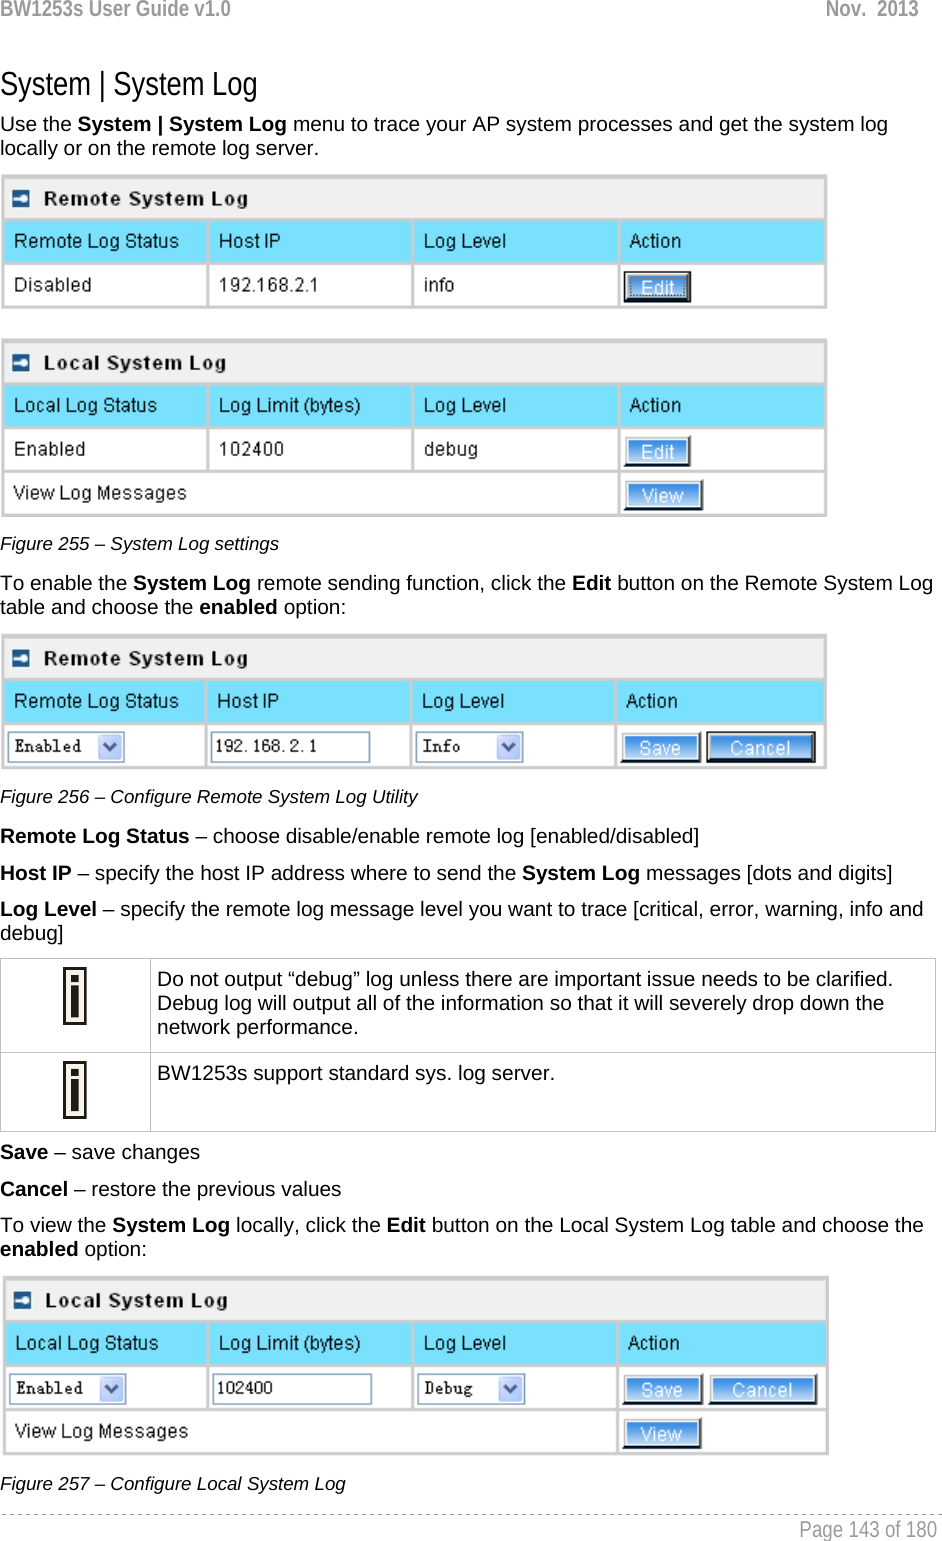 BW1253s User Guide v1.0  Nov.  2013     Page 143 of 180   System | System Log Use the System | System Log menu to trace your AP system processes and get the system log locally or on the remote log server.   Figure 255 – System Log settings To enable the System Log remote sending function, click the Edit button on the Remote System Log table and choose the enabled option:  Figure 256 – Configure Remote System Log Utility Remote Log Status – choose disable/enable remote log [enabled/disabled] Host IP – specify the host IP address where to send the System Log messages [dots and digits] Log Level – specify the remote log message level you want to trace [critical, error, warning, info and debug]  Do not output “debug” log unless there are important issue needs to be clarified. Debug log will output all of the information so that it will severely drop down the network performance.  BW1253s support standard sys. log server. Save – save changes Cancel – restore the previous values To view the System Log locally, click the Edit button on the Local System Log table and choose the enabled option:  Figure 257 – Configure Local System Log 